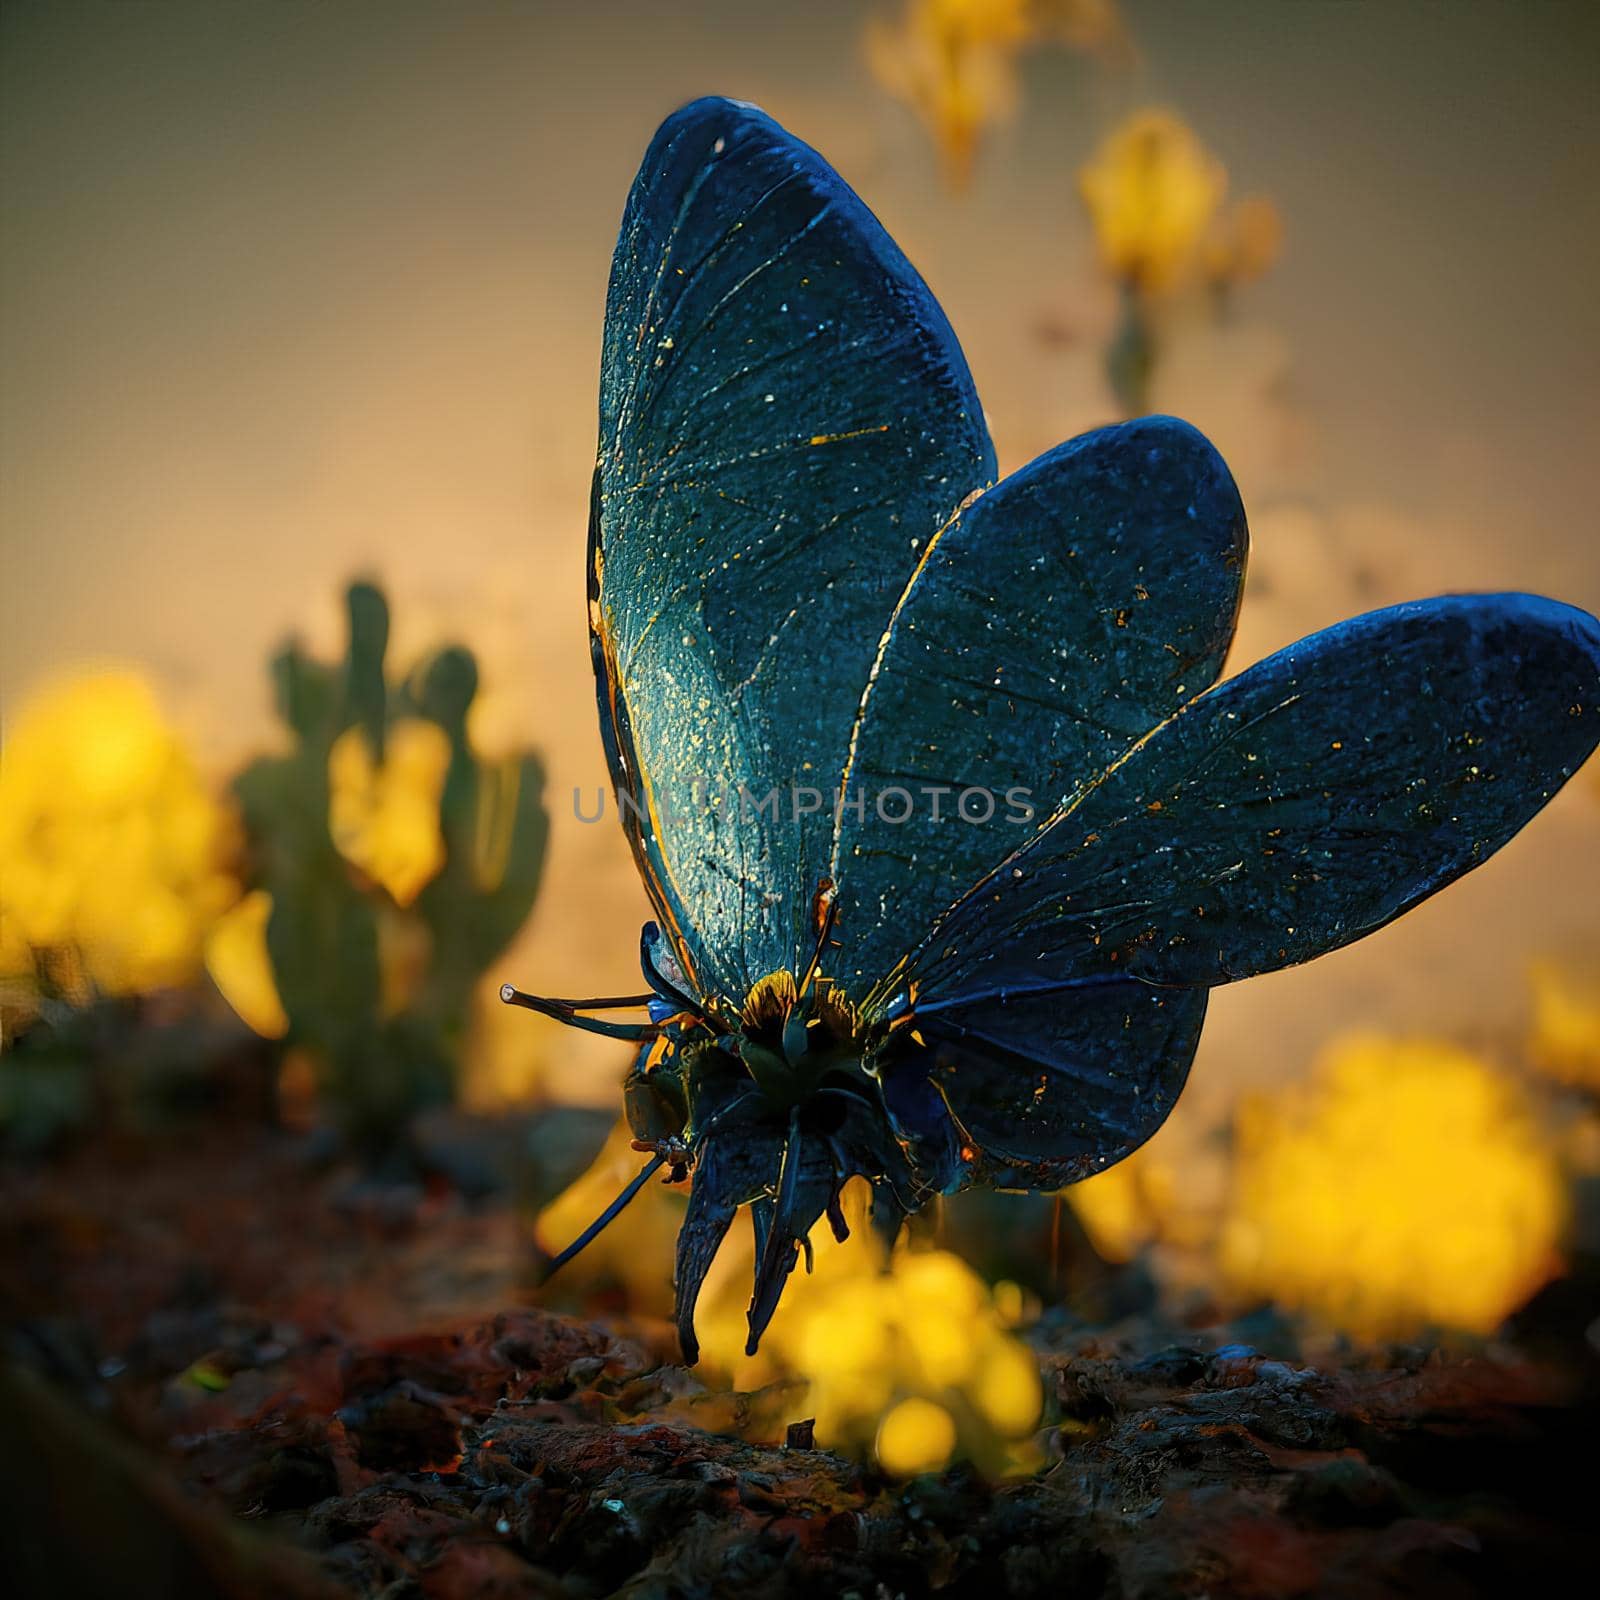 Digital art of butterfly sitting on flower. High quality photo